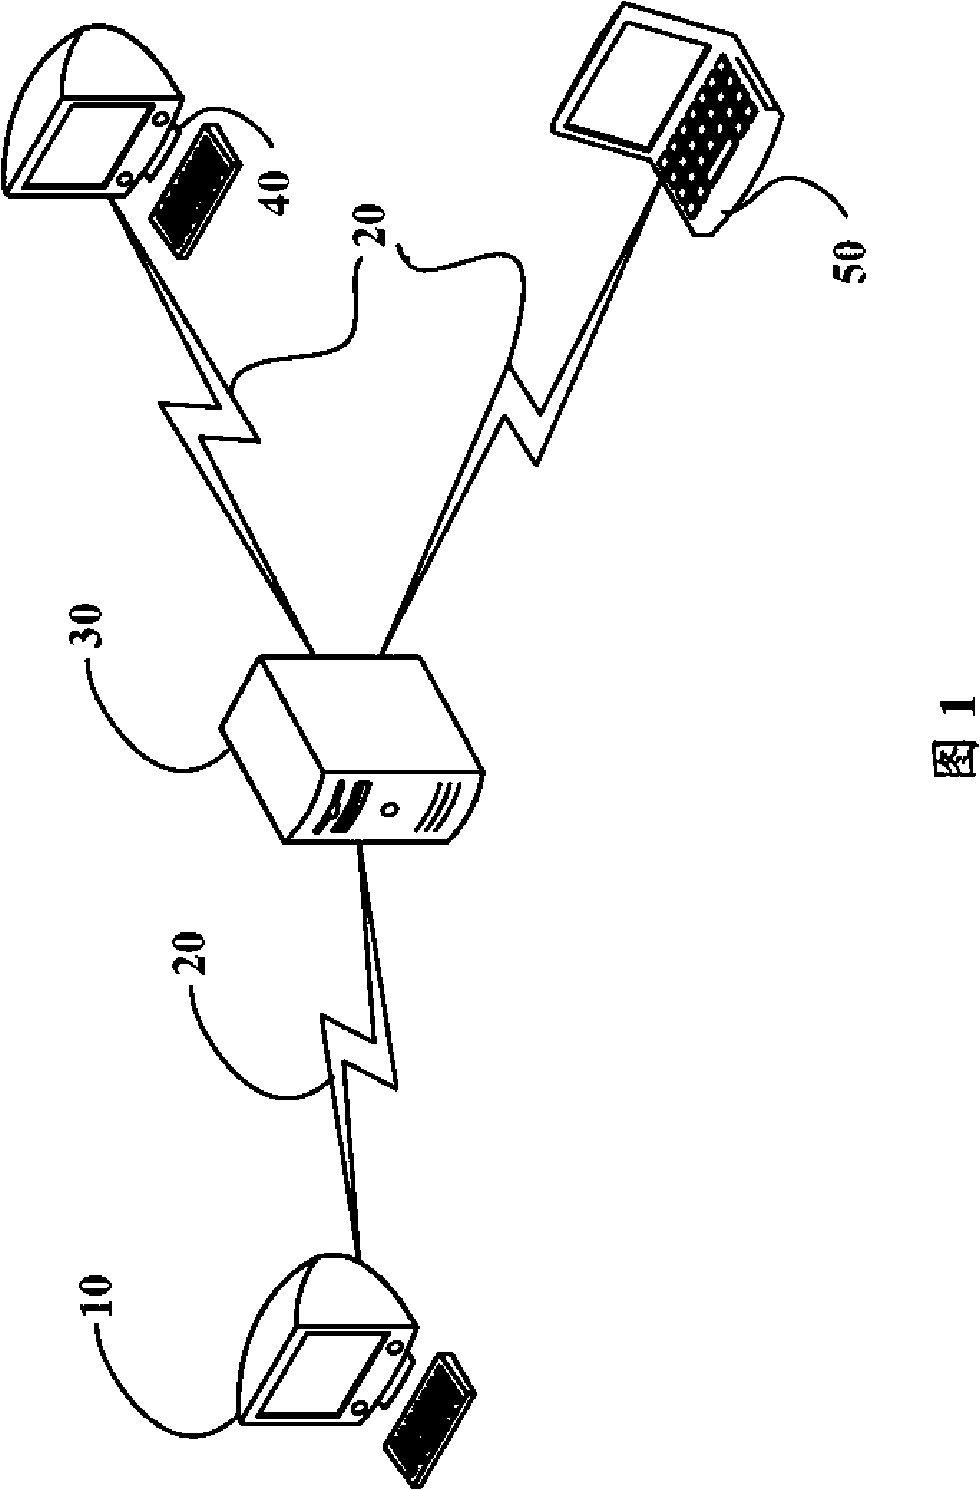 Font automatic identification and conversion system and method